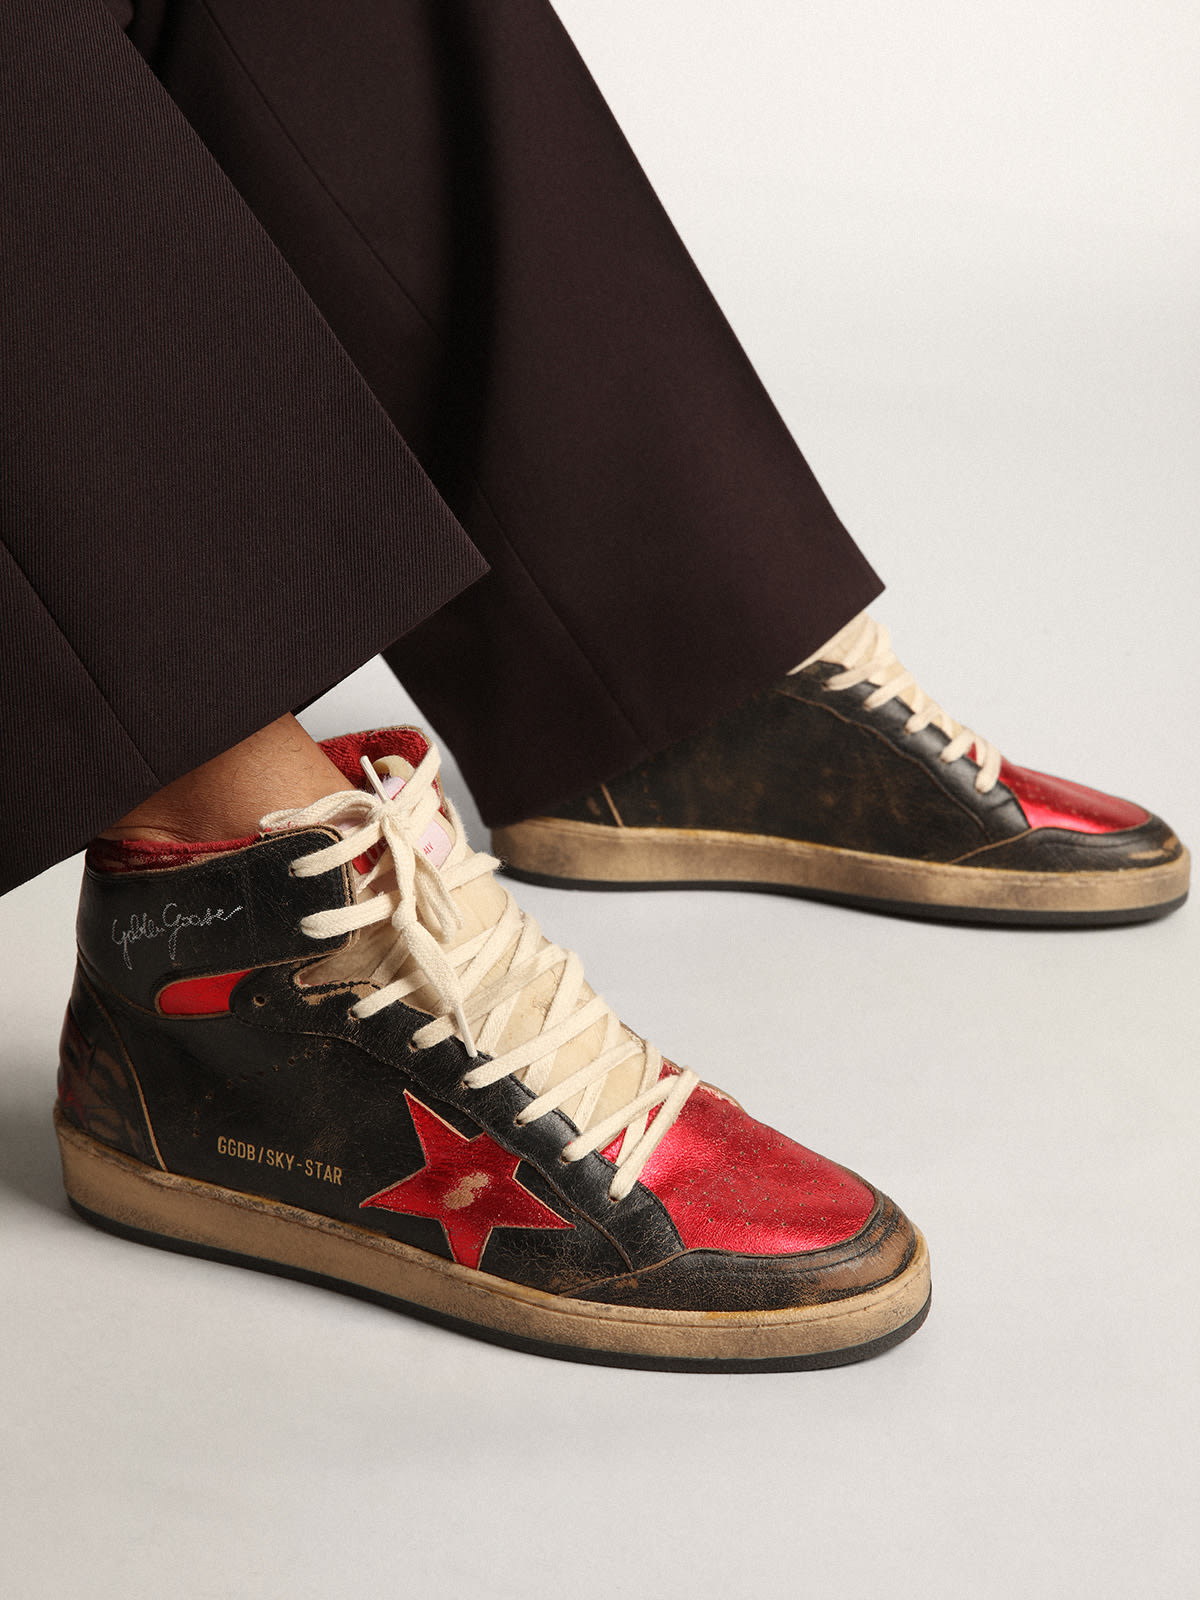 Men's Sky-Star in glossy black leather with red star | Golden Goose